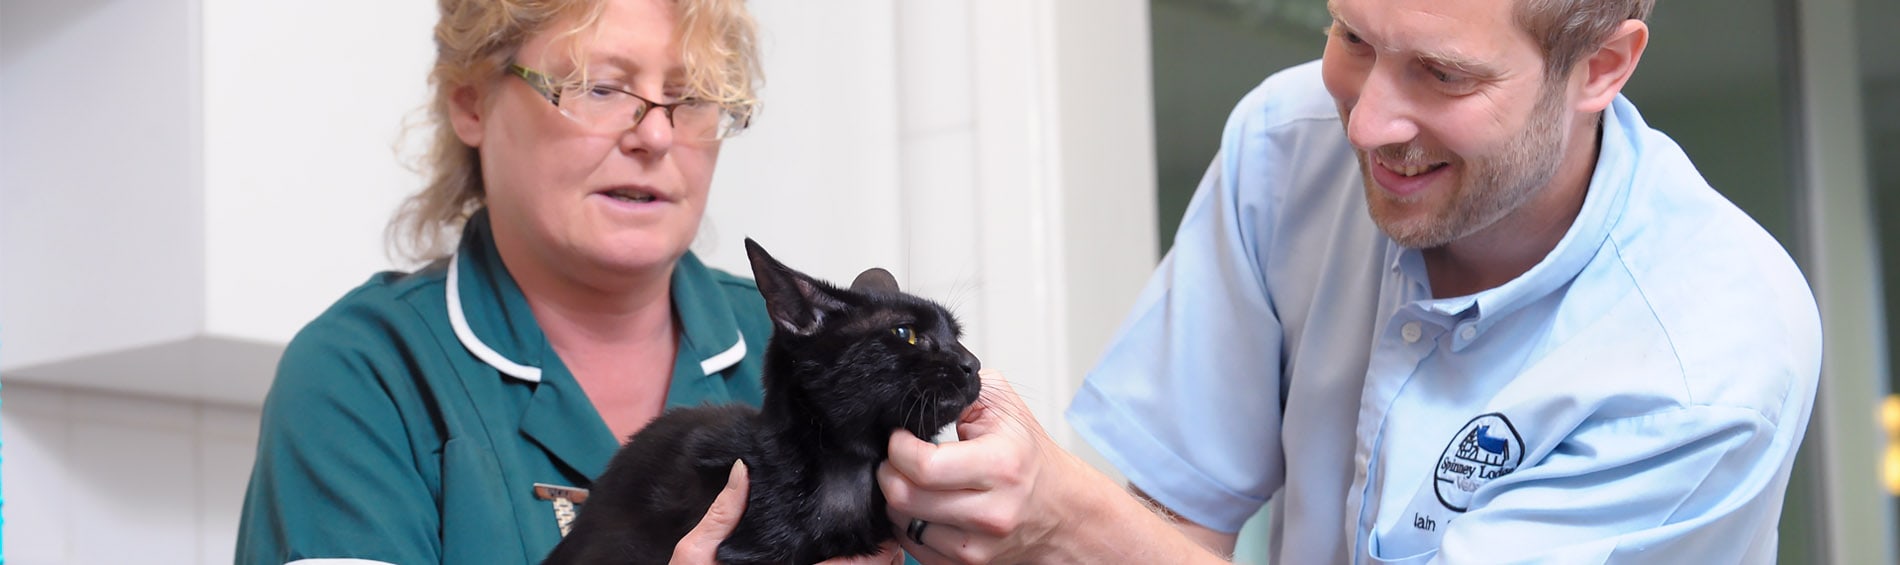 Cat Vaccinations | Pet Vaccinations | Spinney Vets